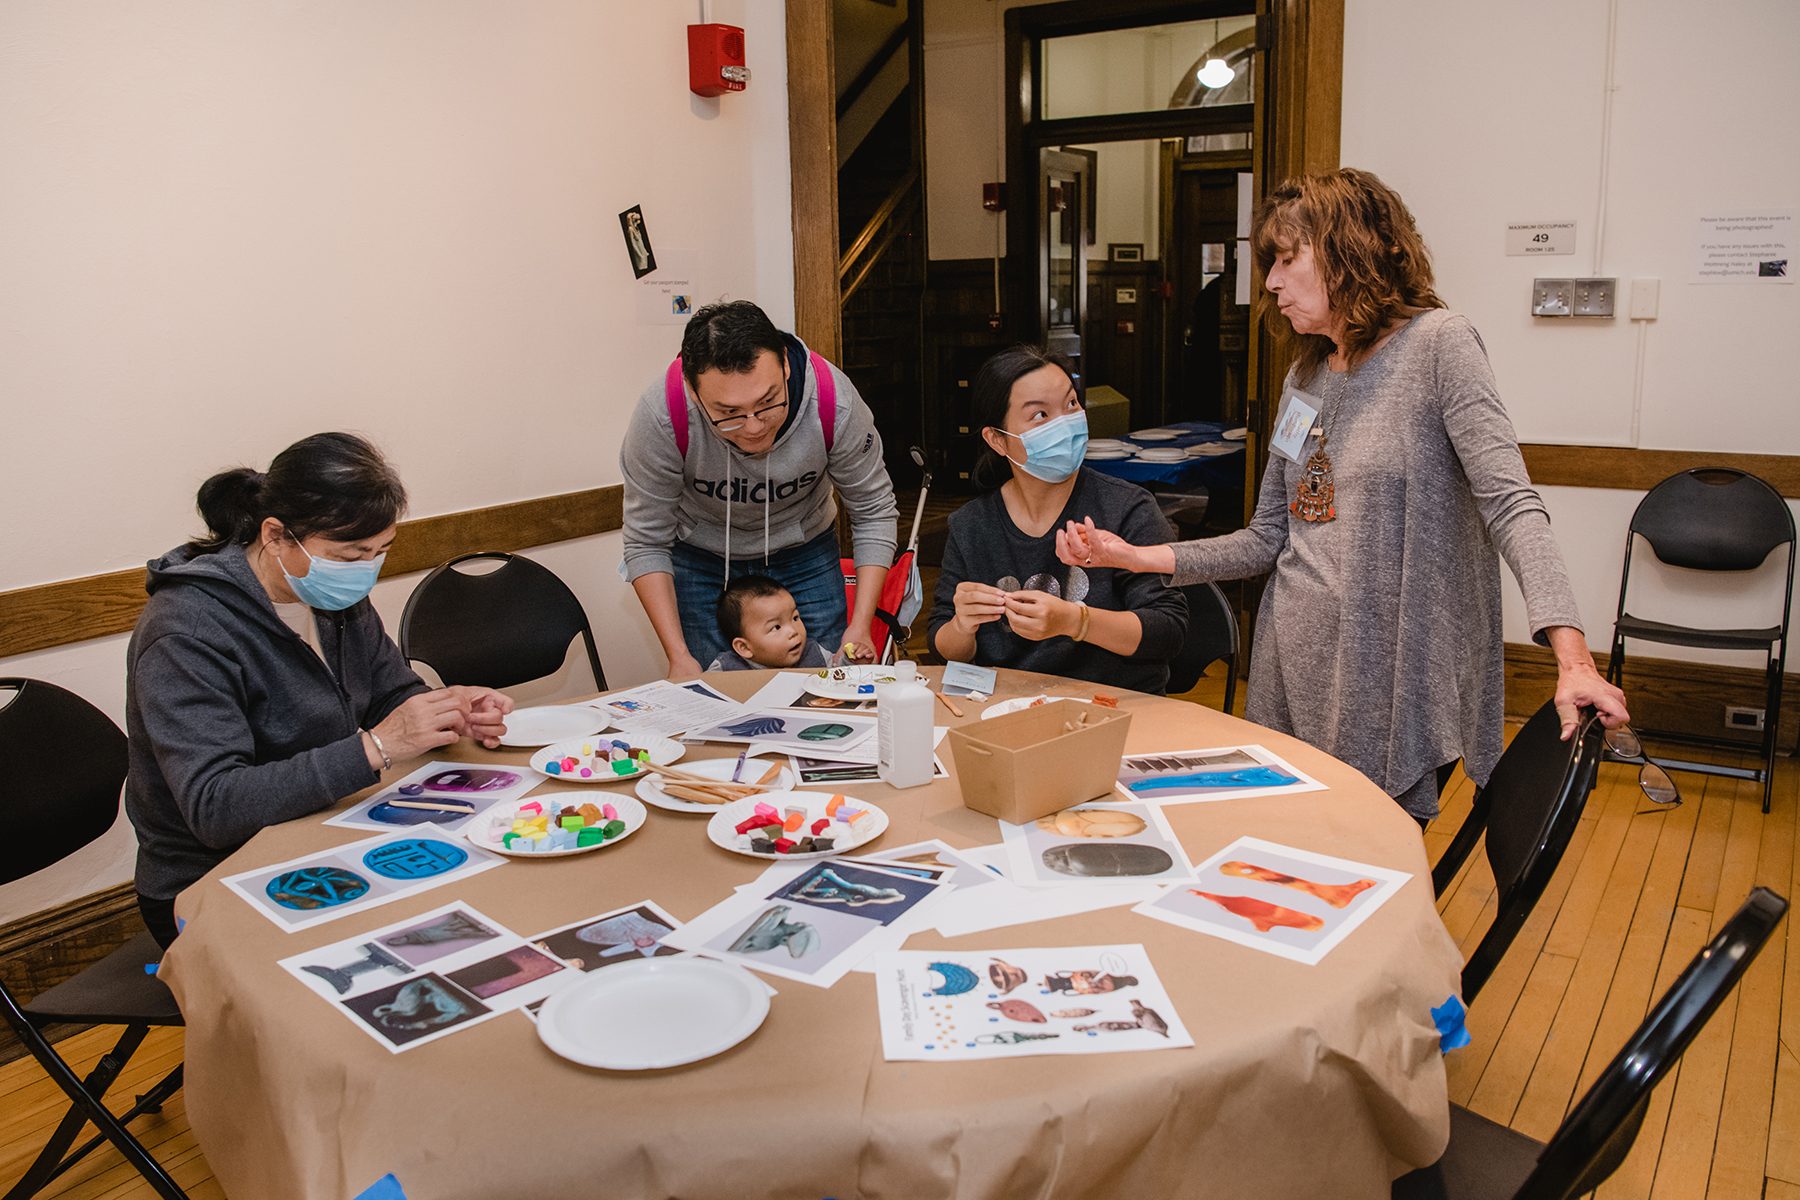 Three adults and a toddler at a table covered with a paper tablecloth, reference photos of Kelsey Museum artifacts, and clay to make crafts. A volunteer docent speaks with one of the adults at the craft station.